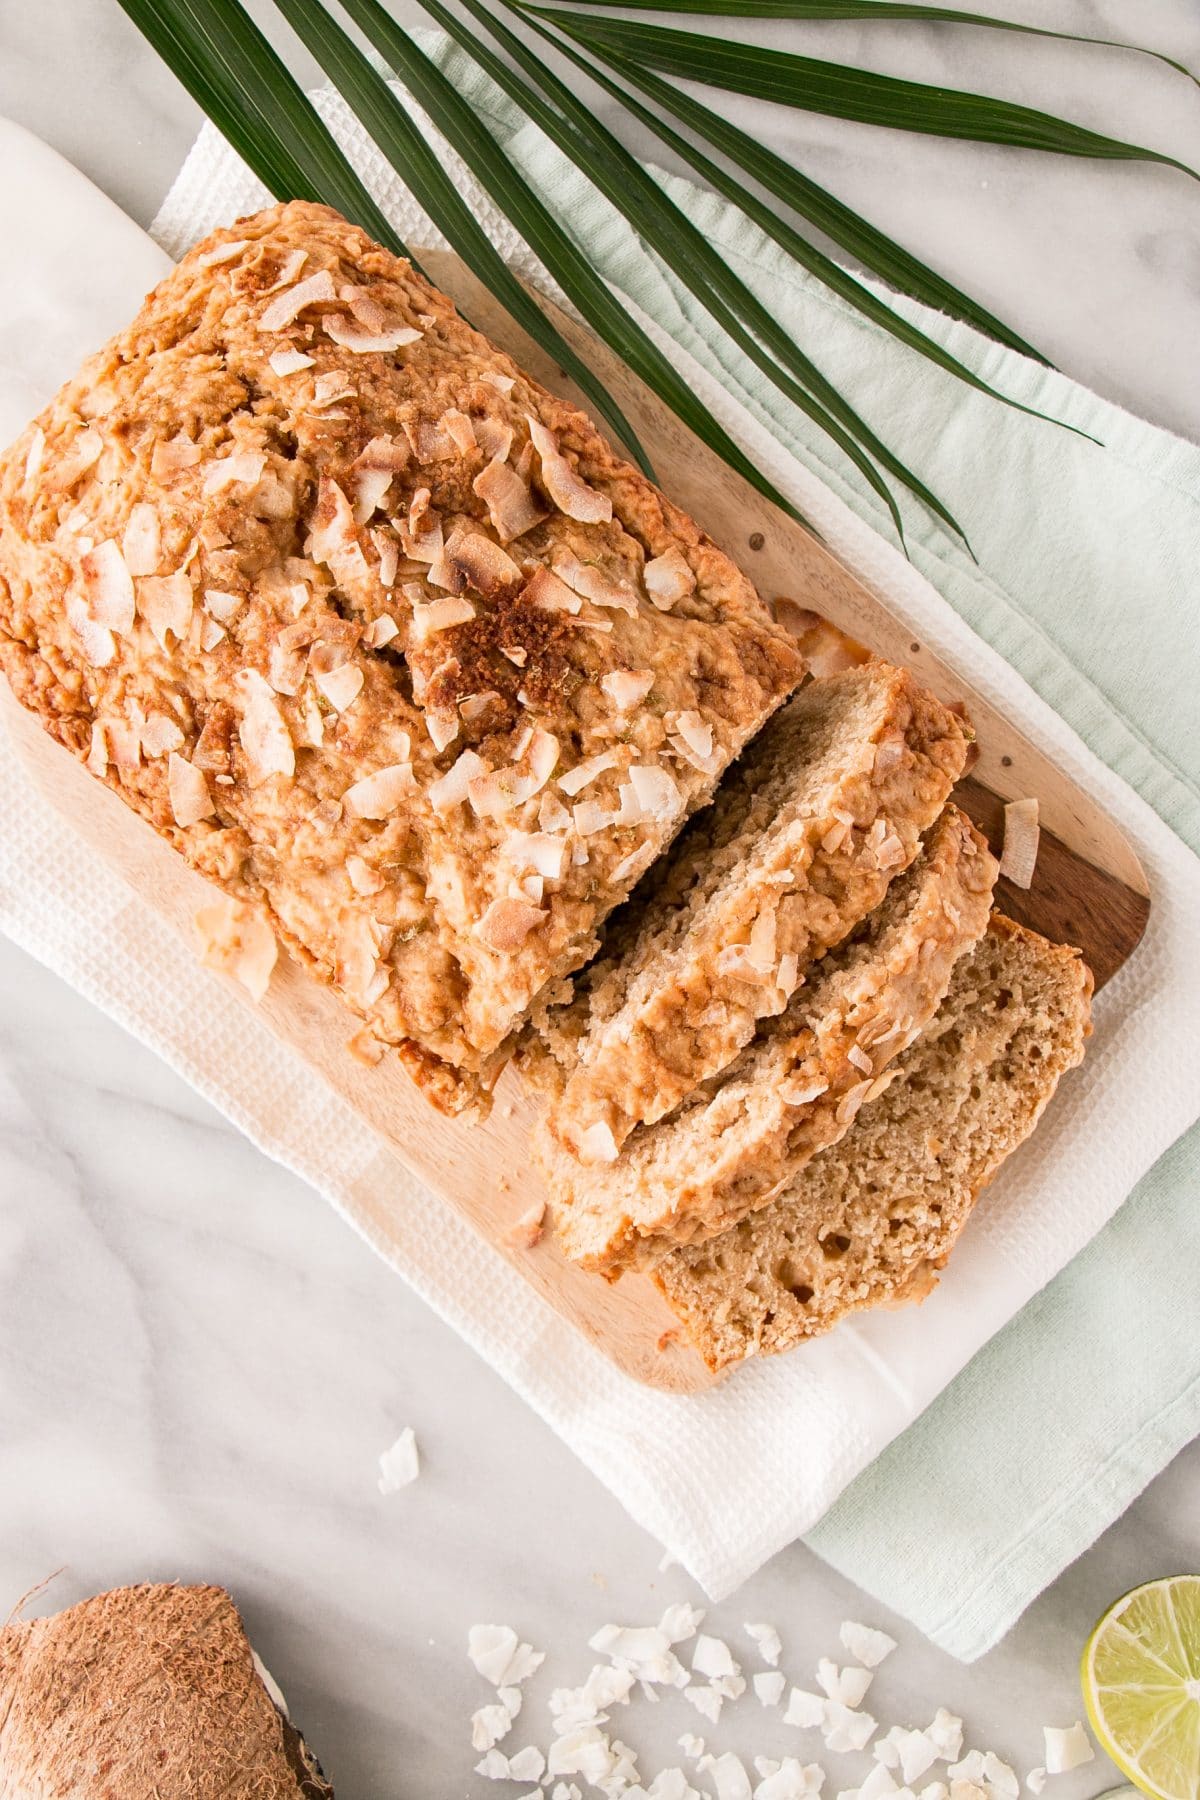 This Coconut Lime Loaf is a one bowl easy to prepare quick bread. Brighten up your day with this vibrant Coconut Lime Loaf! #coconut #lime #easyrecipe #comfortfood